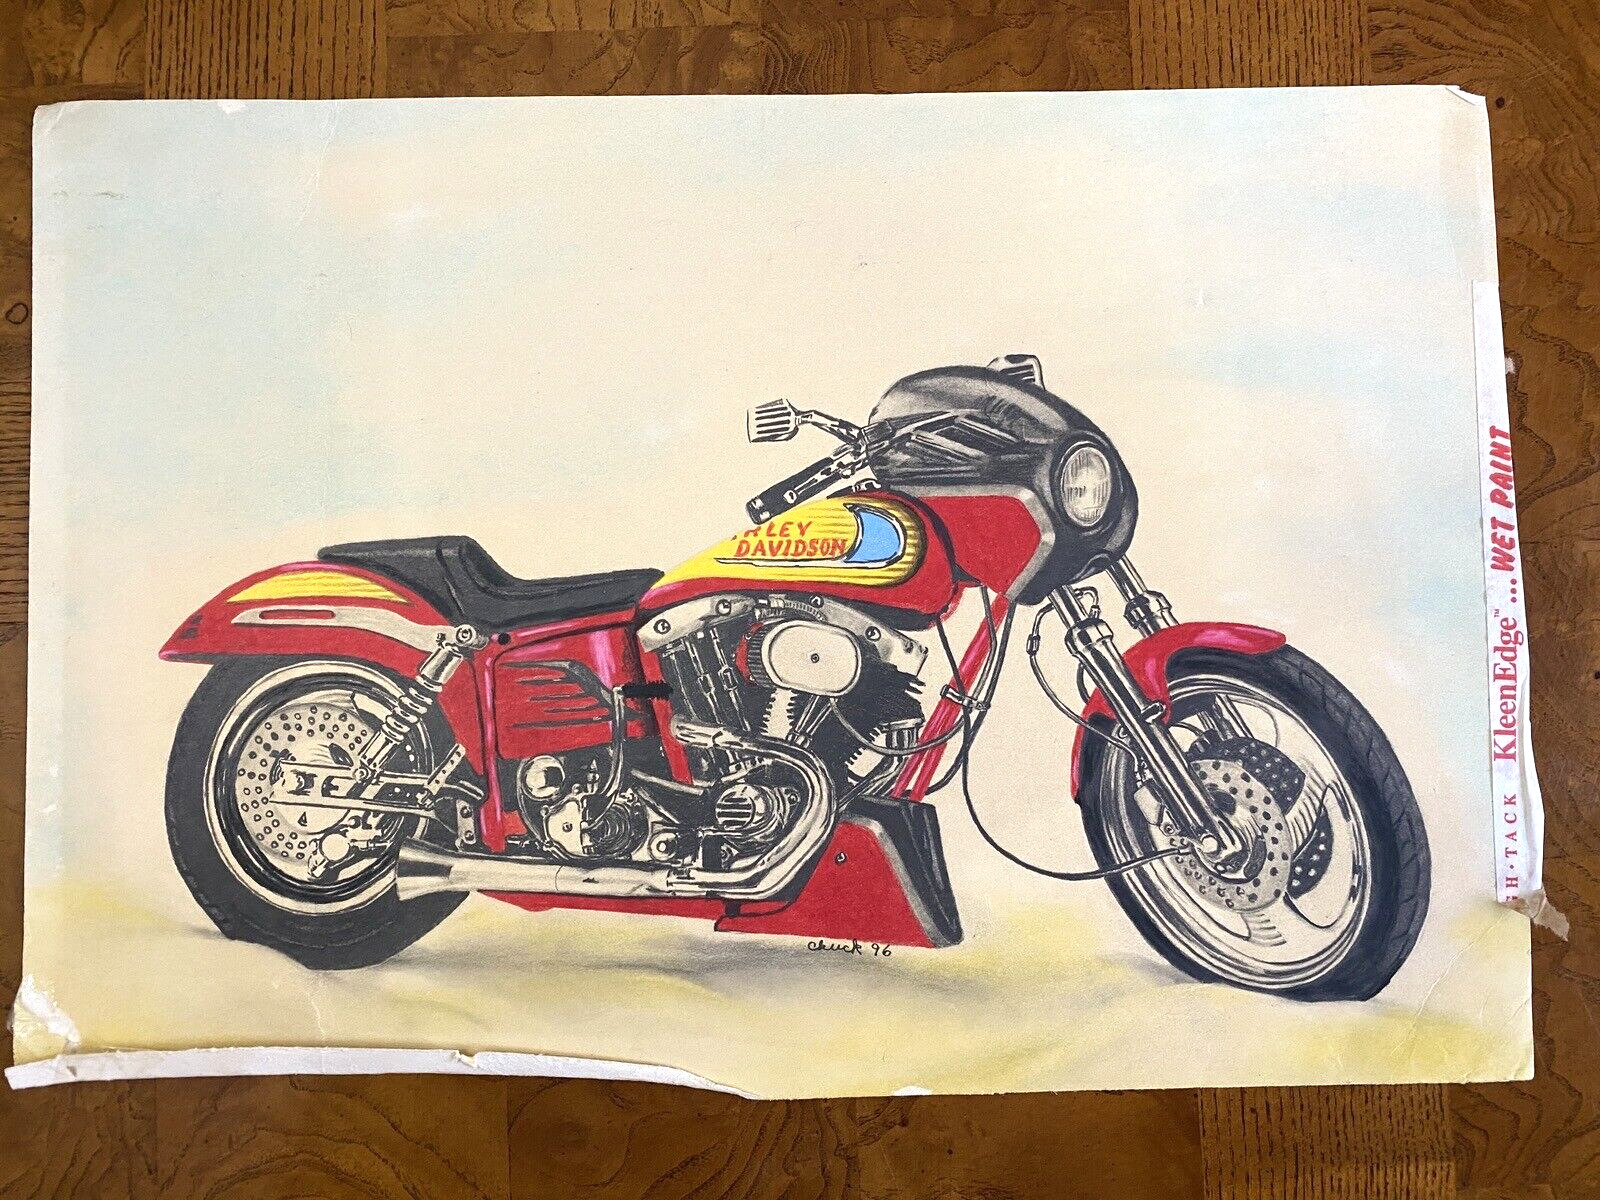 Harley Davidson Art Motorcycle from 1996 by Chuck Rare Drawing or Airbrush